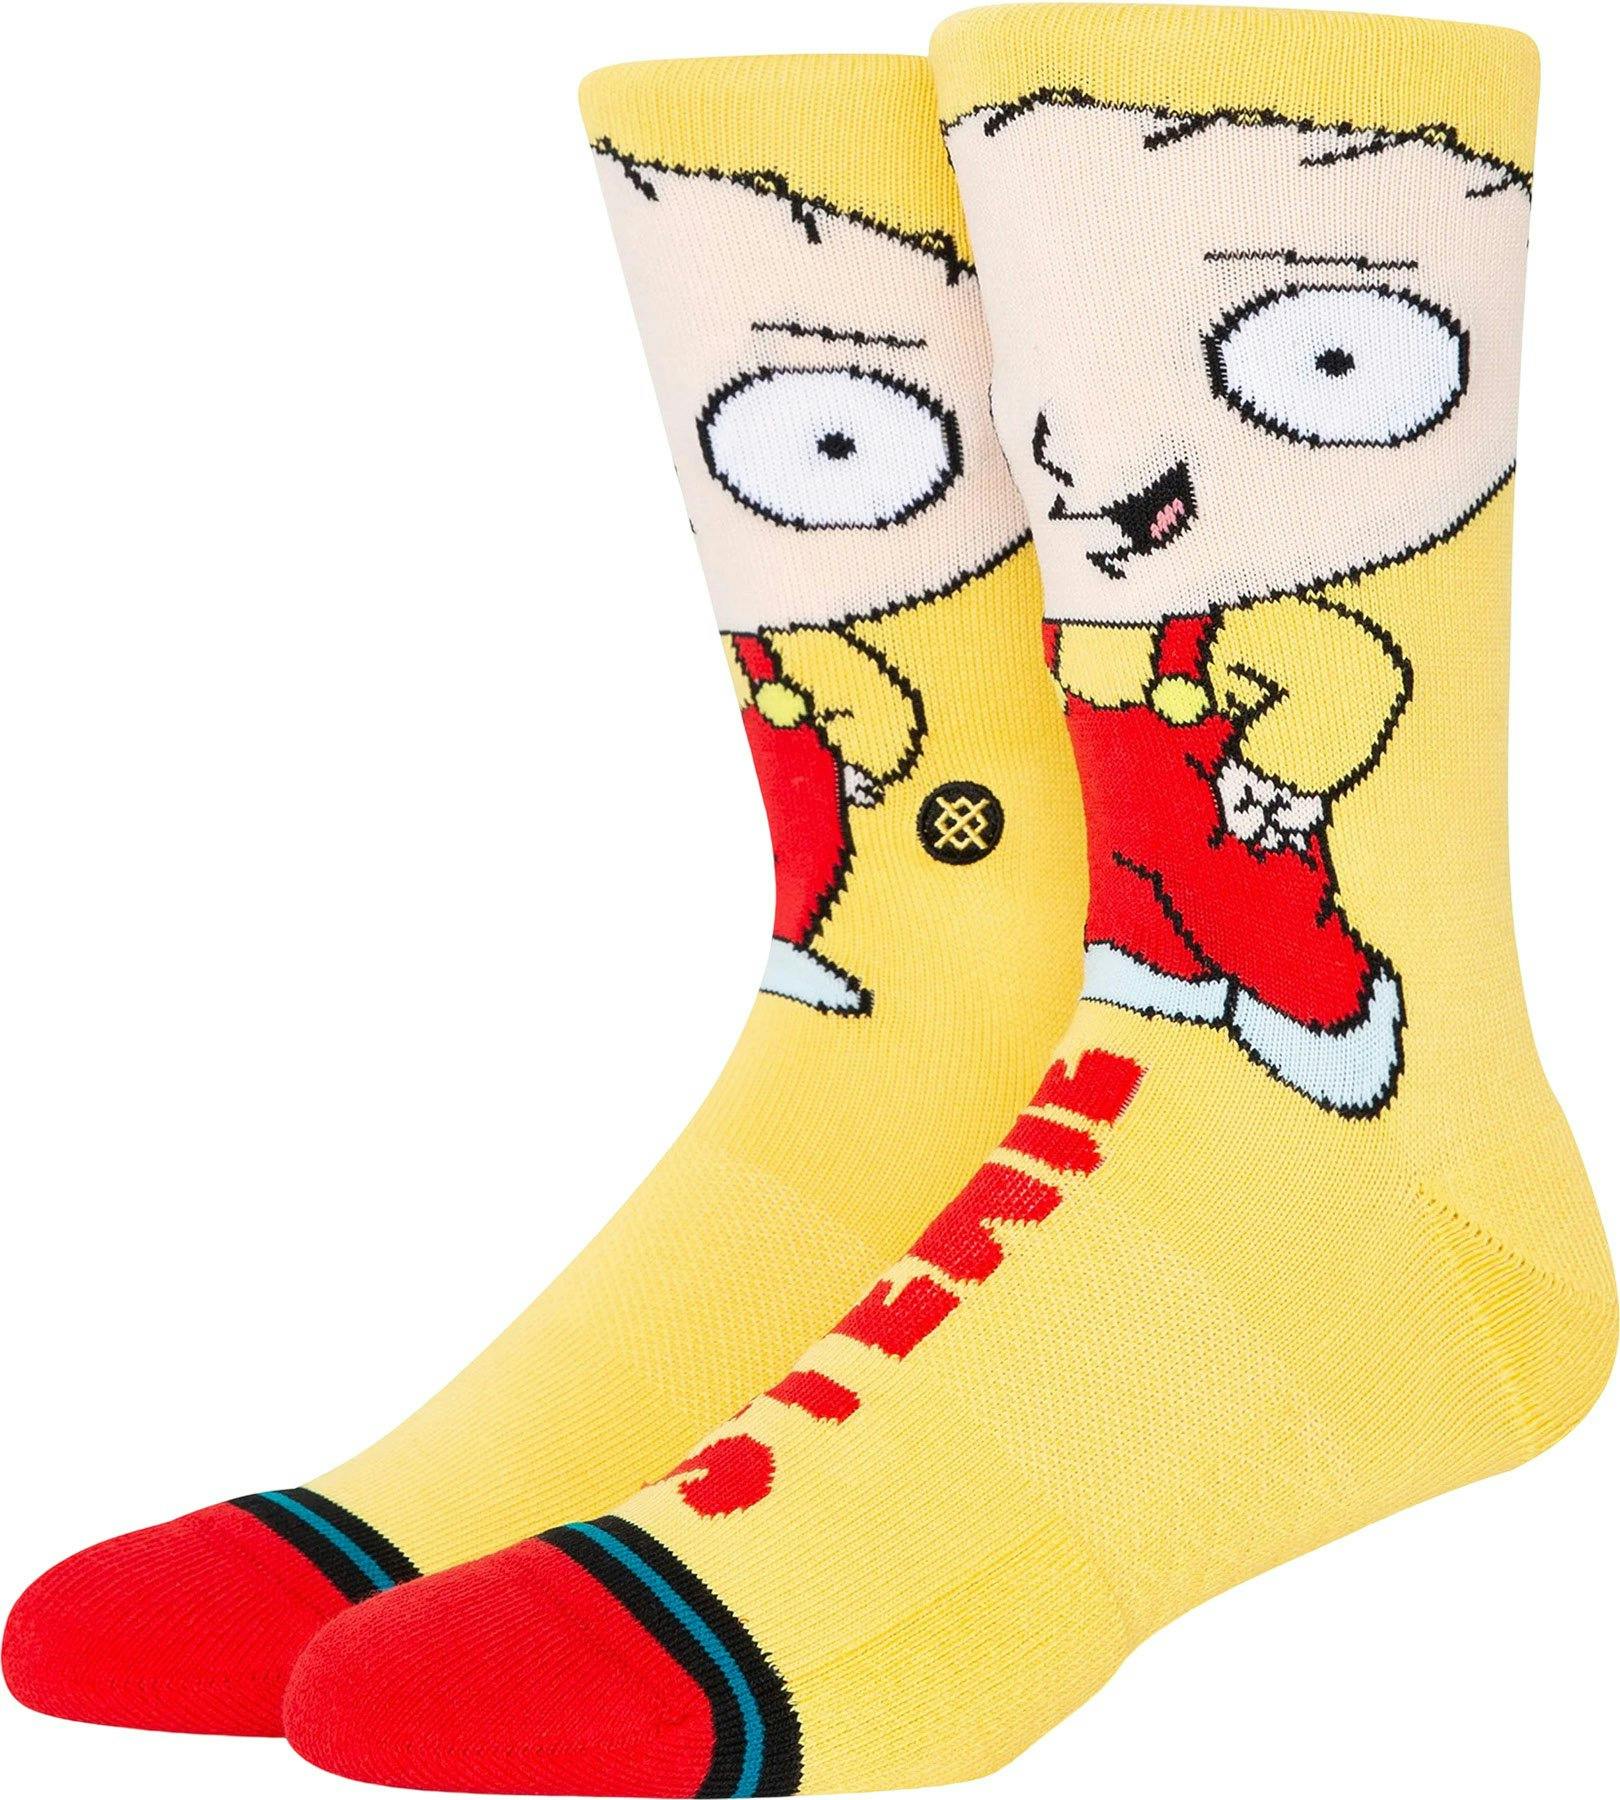 Product image for Family Guy X Stance Stewie Crew Socks - Unisex